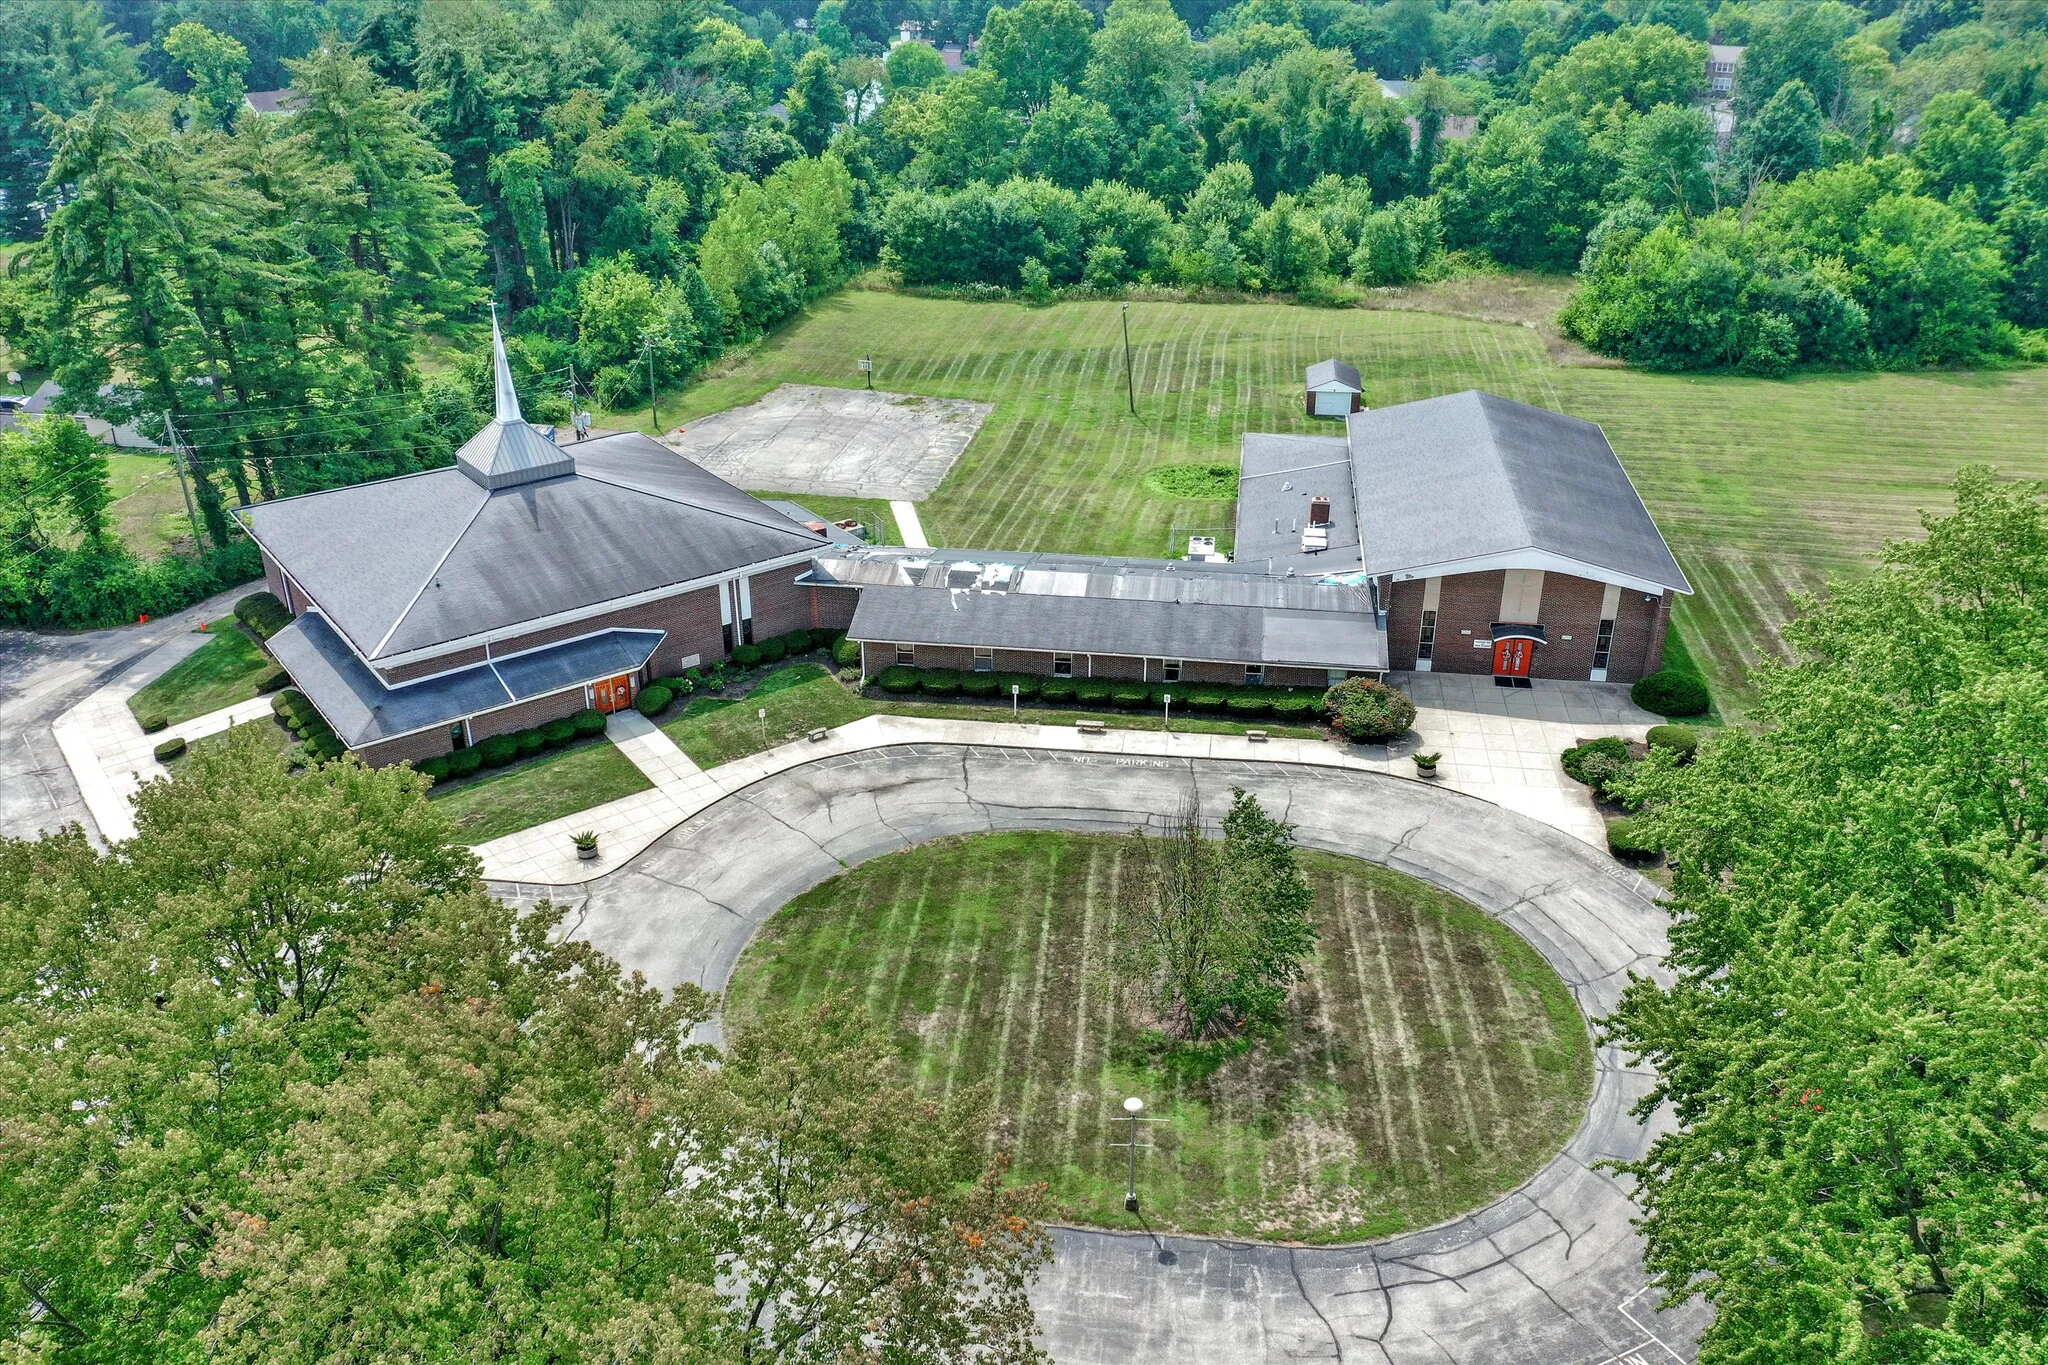 5136 Michigan Rd., Indianapolis, In 46228. 18,452 sq. ft., 10+ Acres.  Sales Price: $2,300,000.  Sale Date: 11/2023